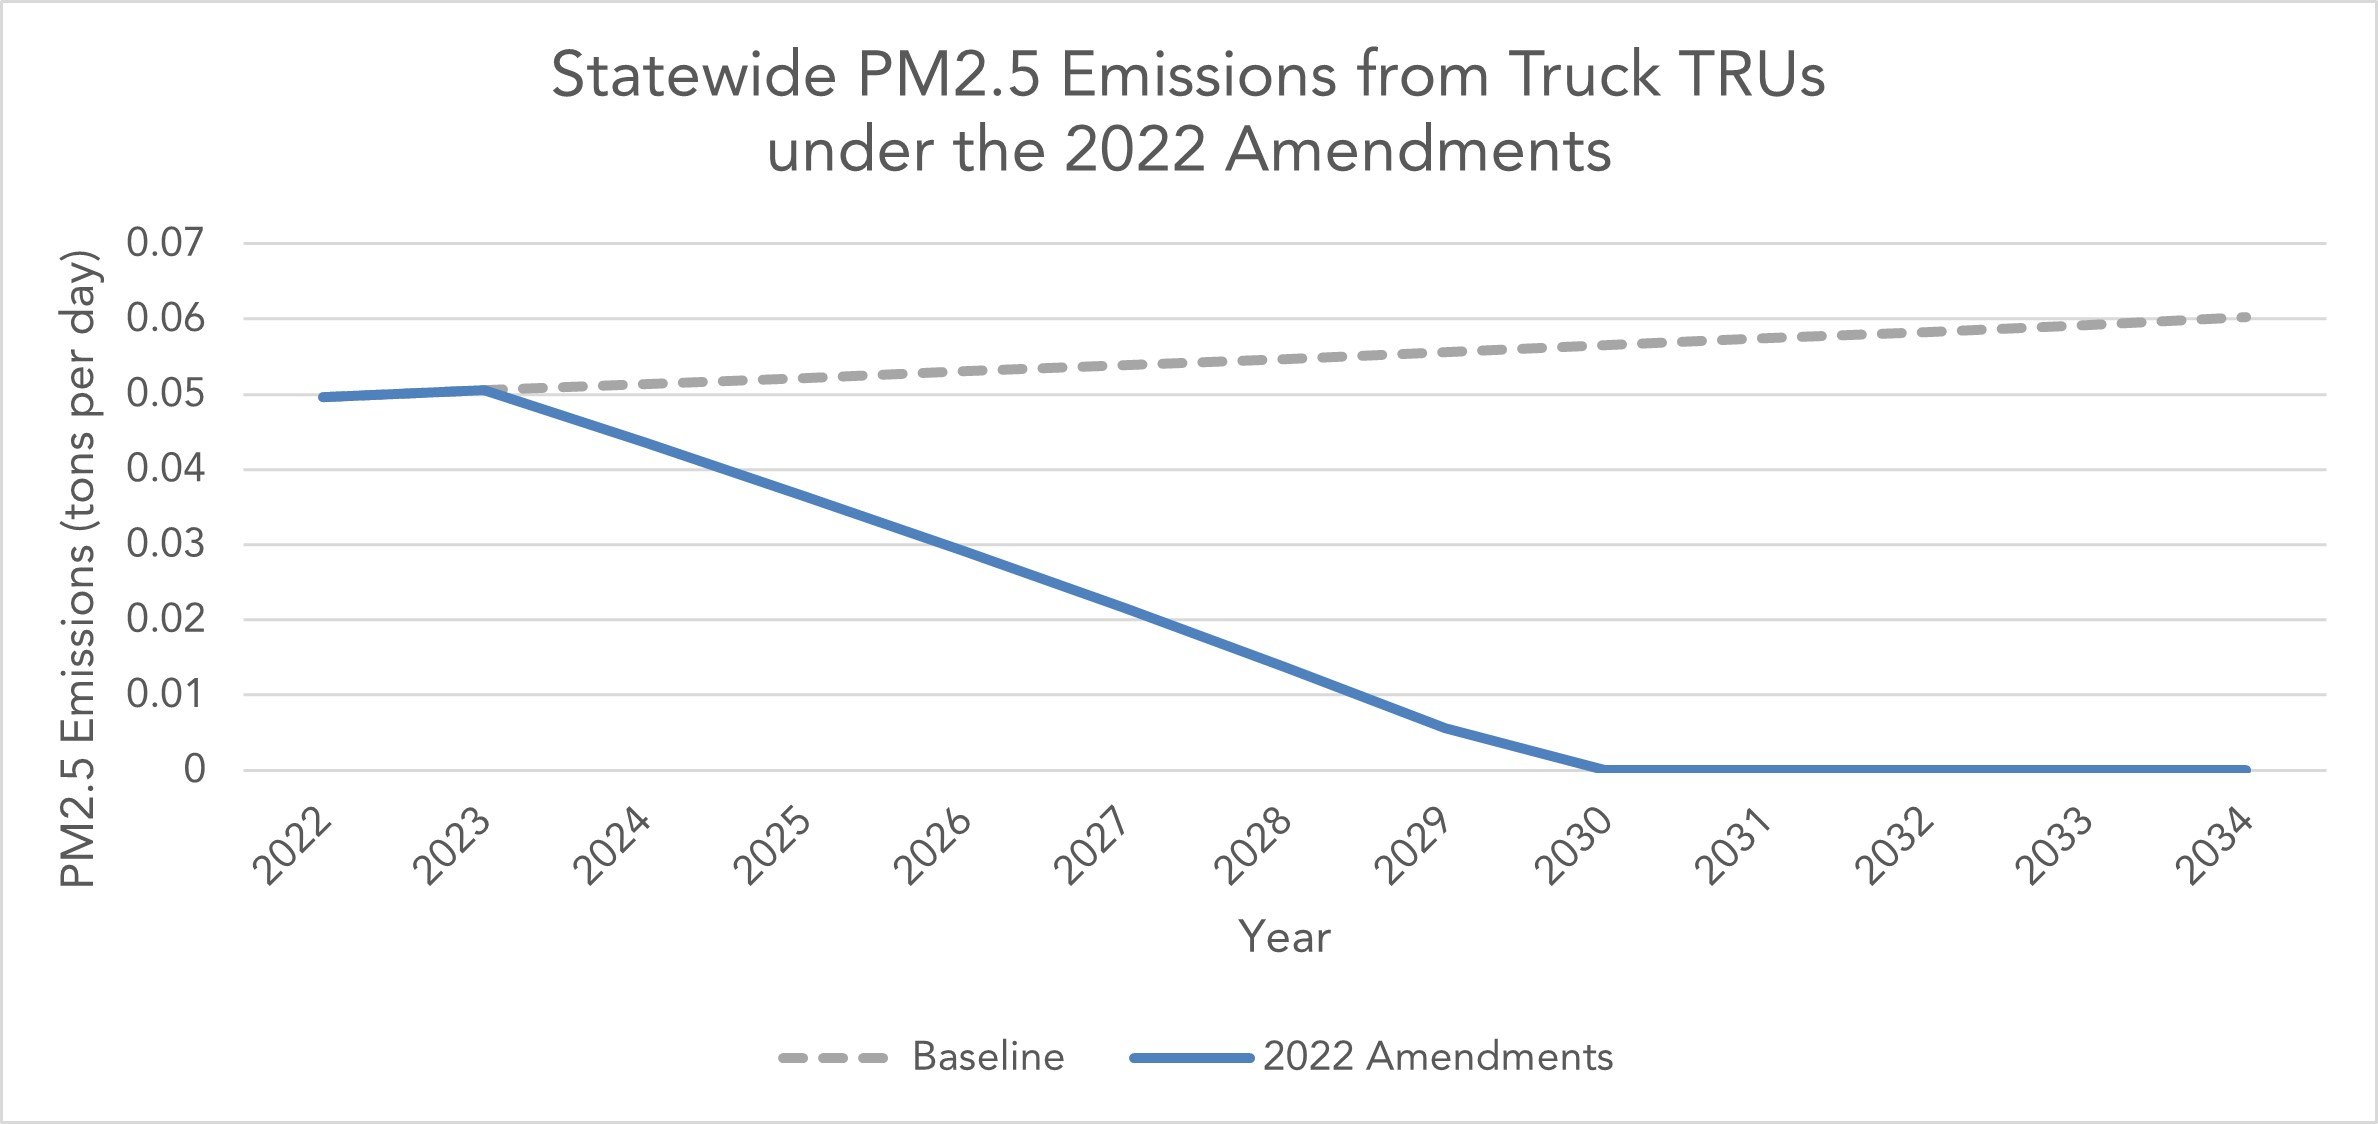 Graph showing statewide PM2.5 emissions from truck TRUs under the 2022 amendments.